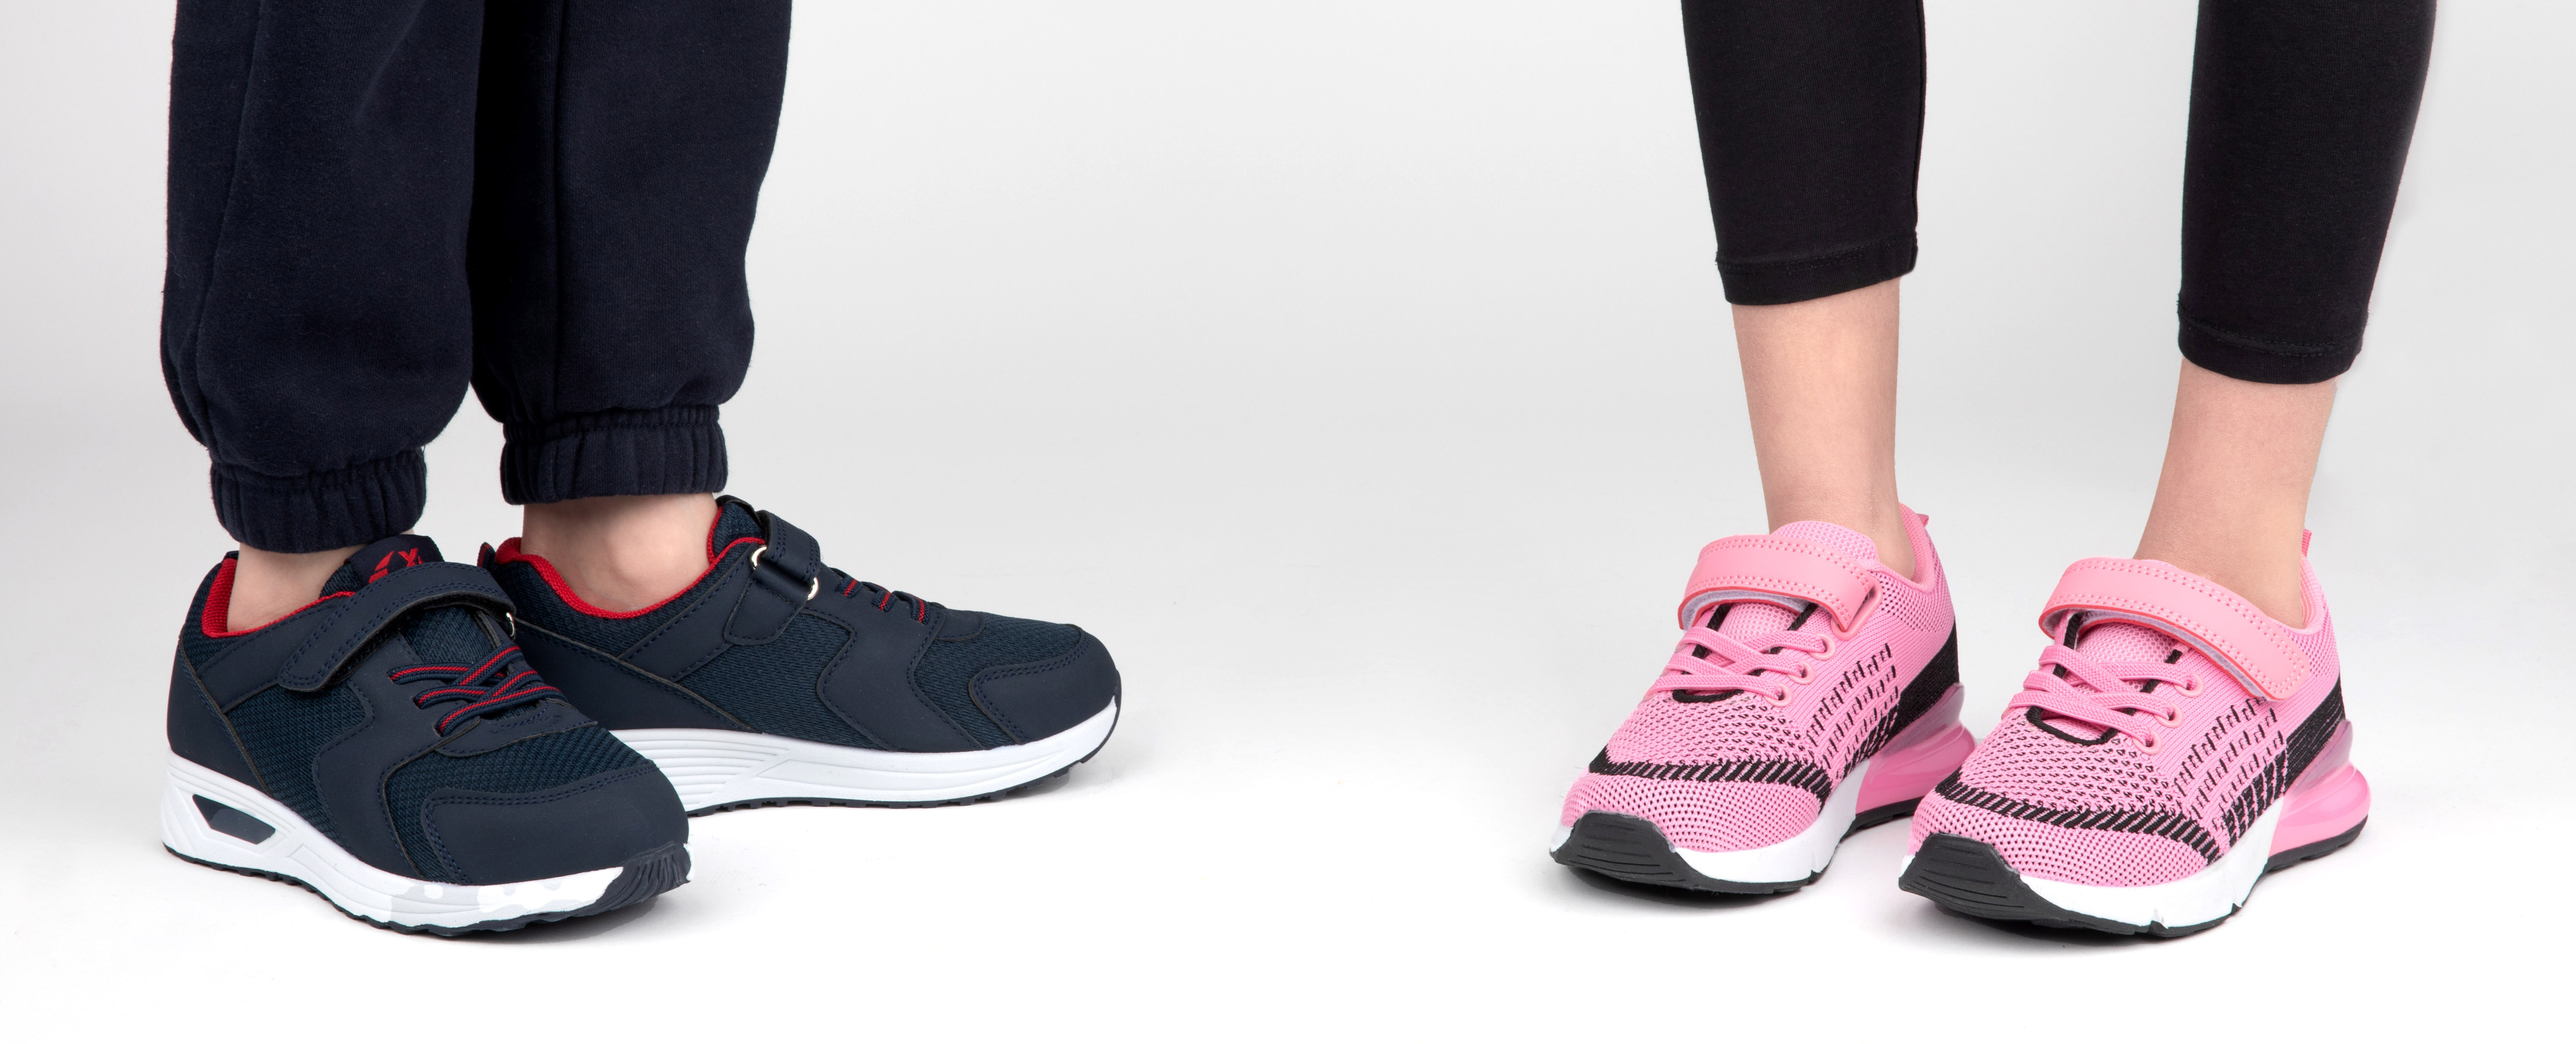 Girls Shoe Fitting Guide: How To Fit 